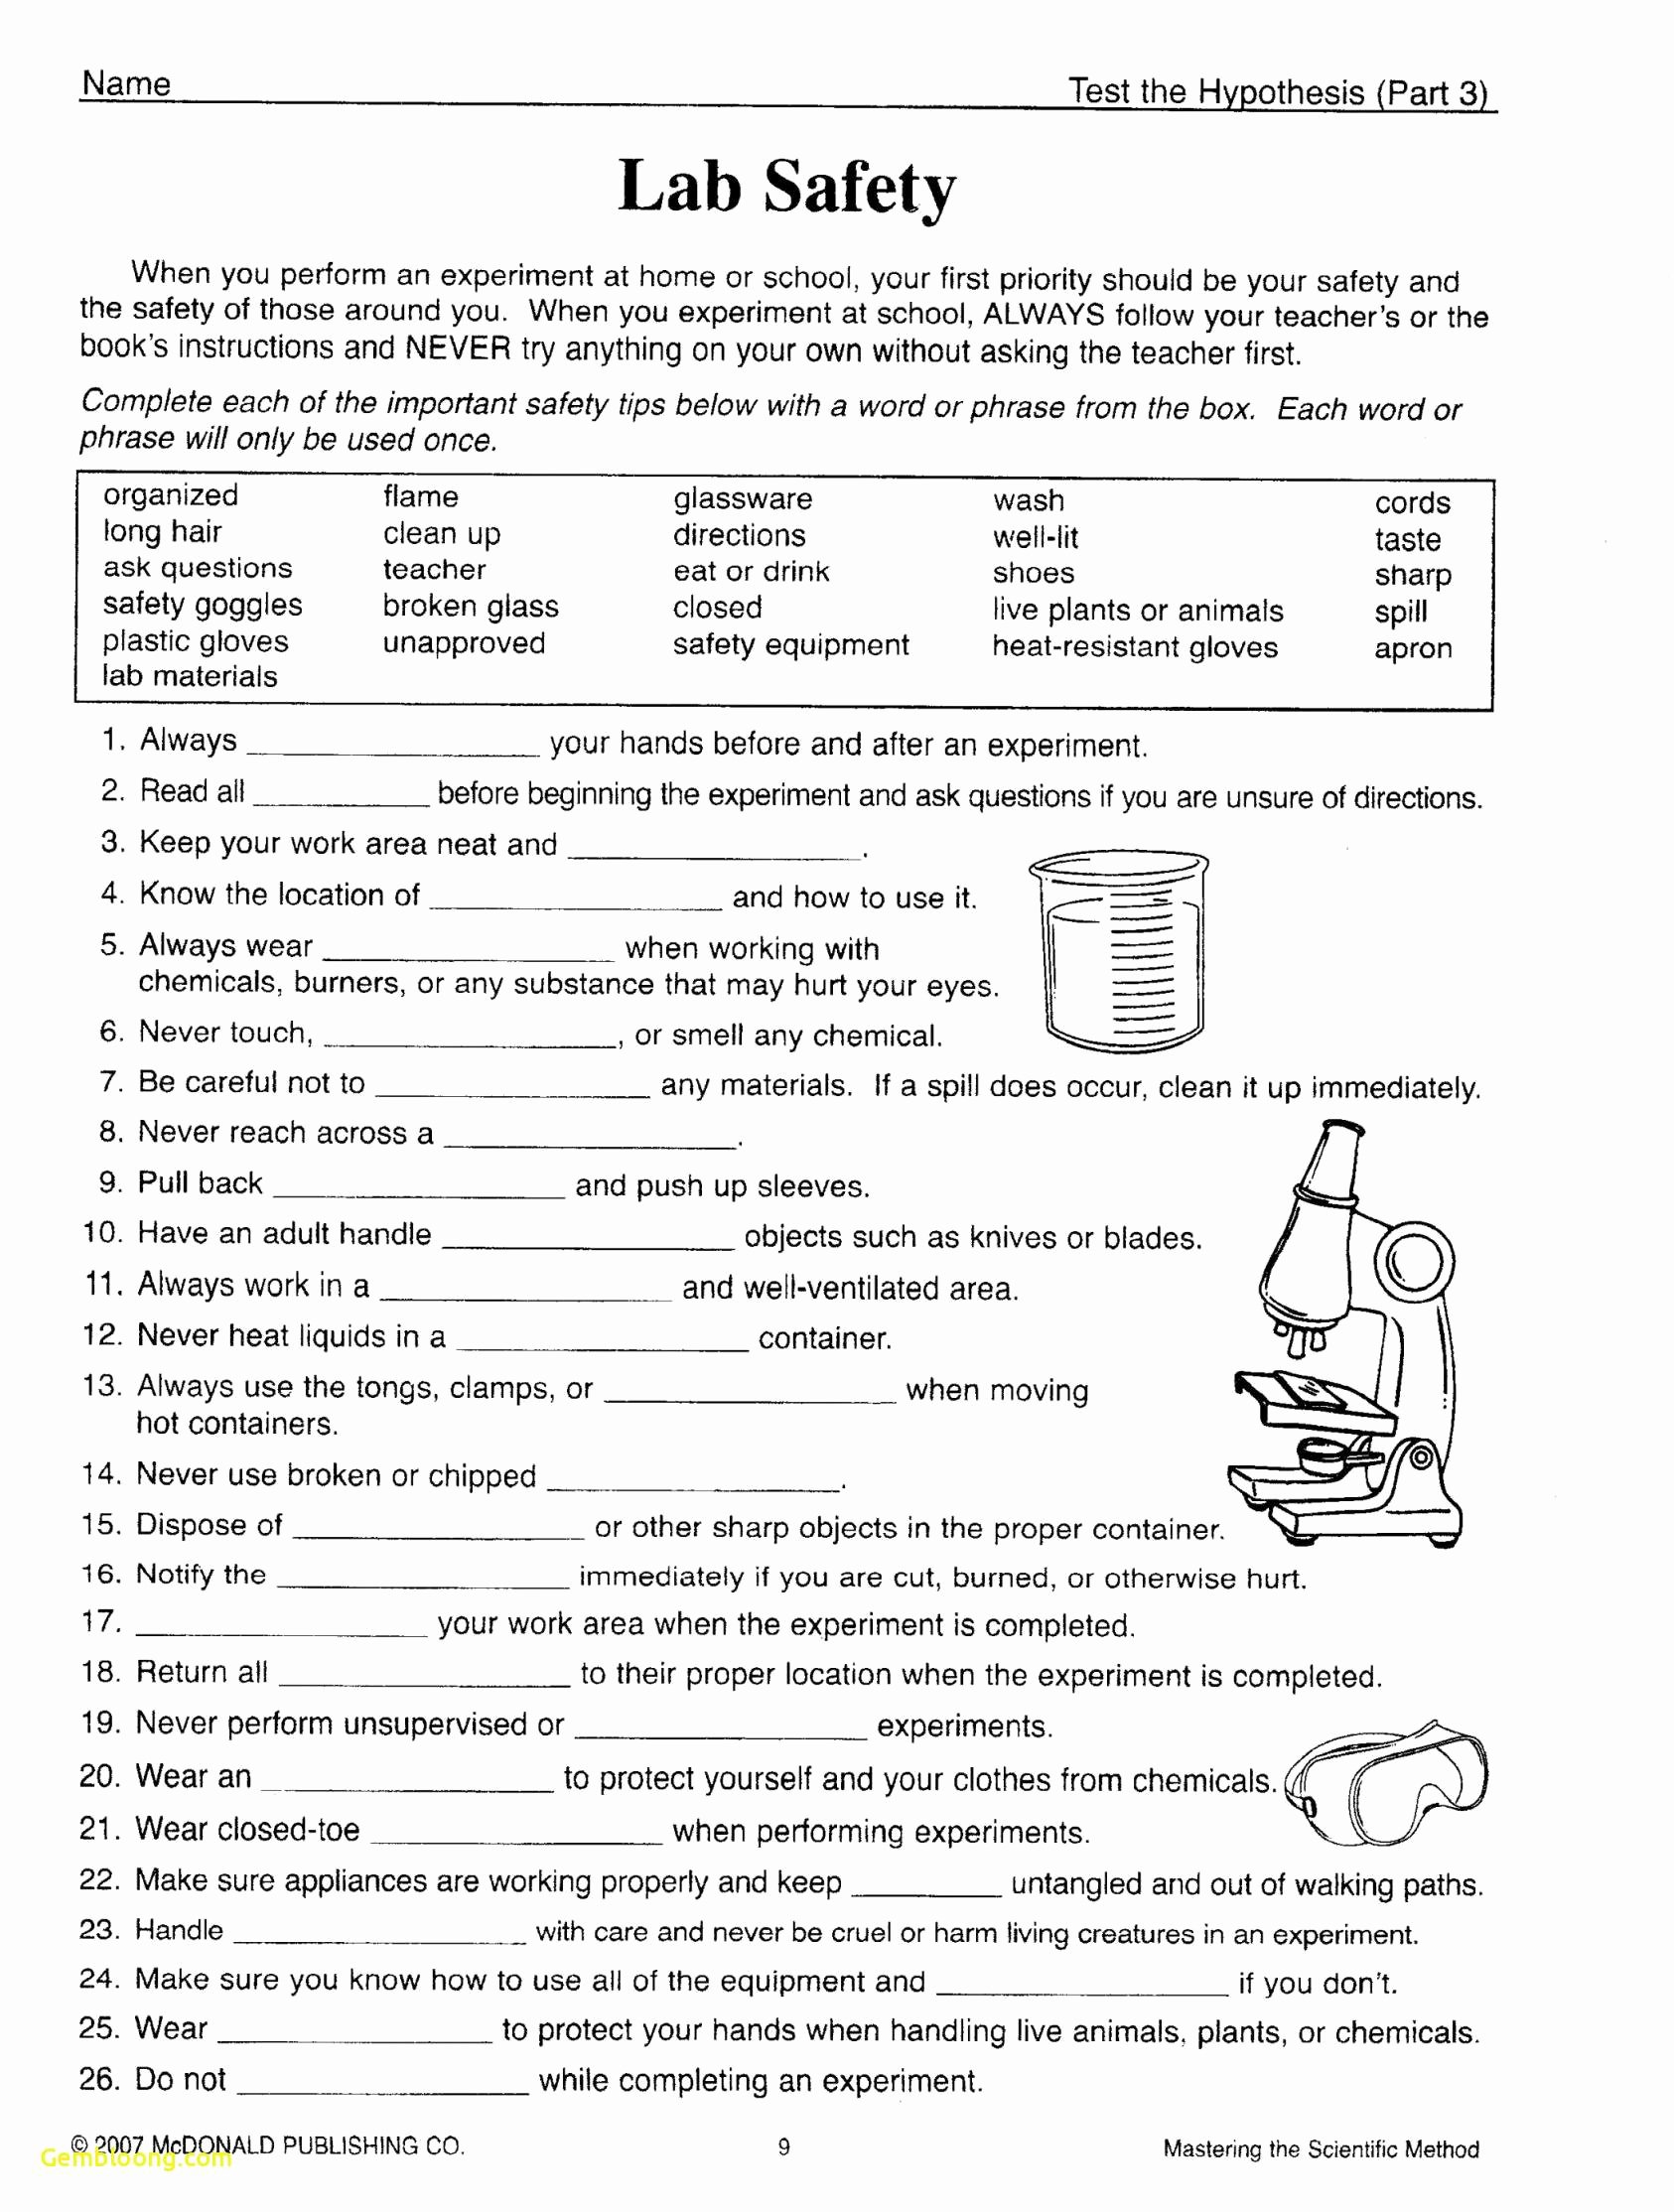 Identifying Variables Worksheet Answers Unique Identifying Independent and Dependent Variables Worksheet